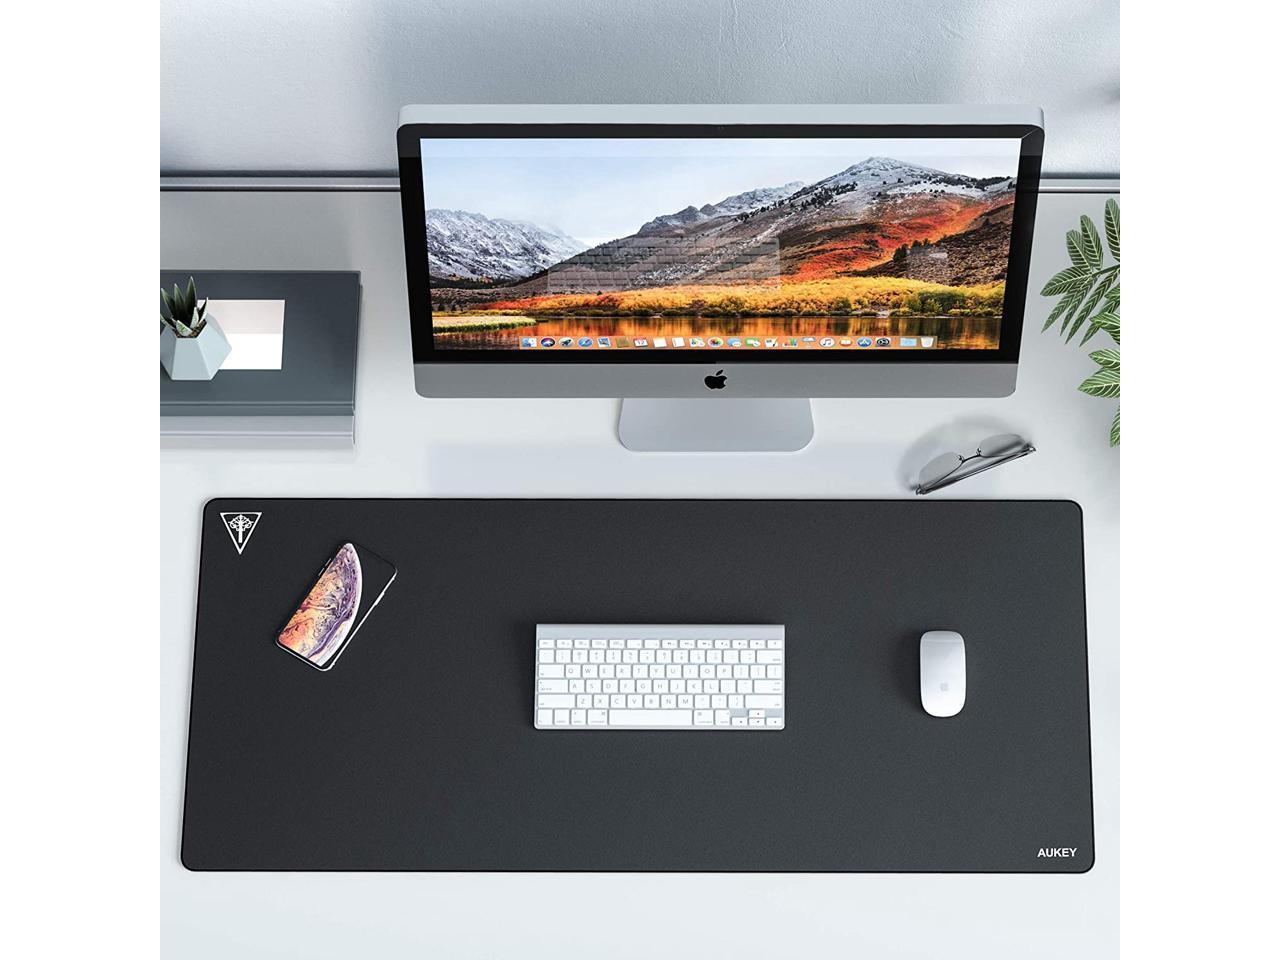 AUKEY Gaming Mouse Pad Large XXL (35.4×15.75×0.15in) Thick Extended Mouse Mat NonSlip Spill